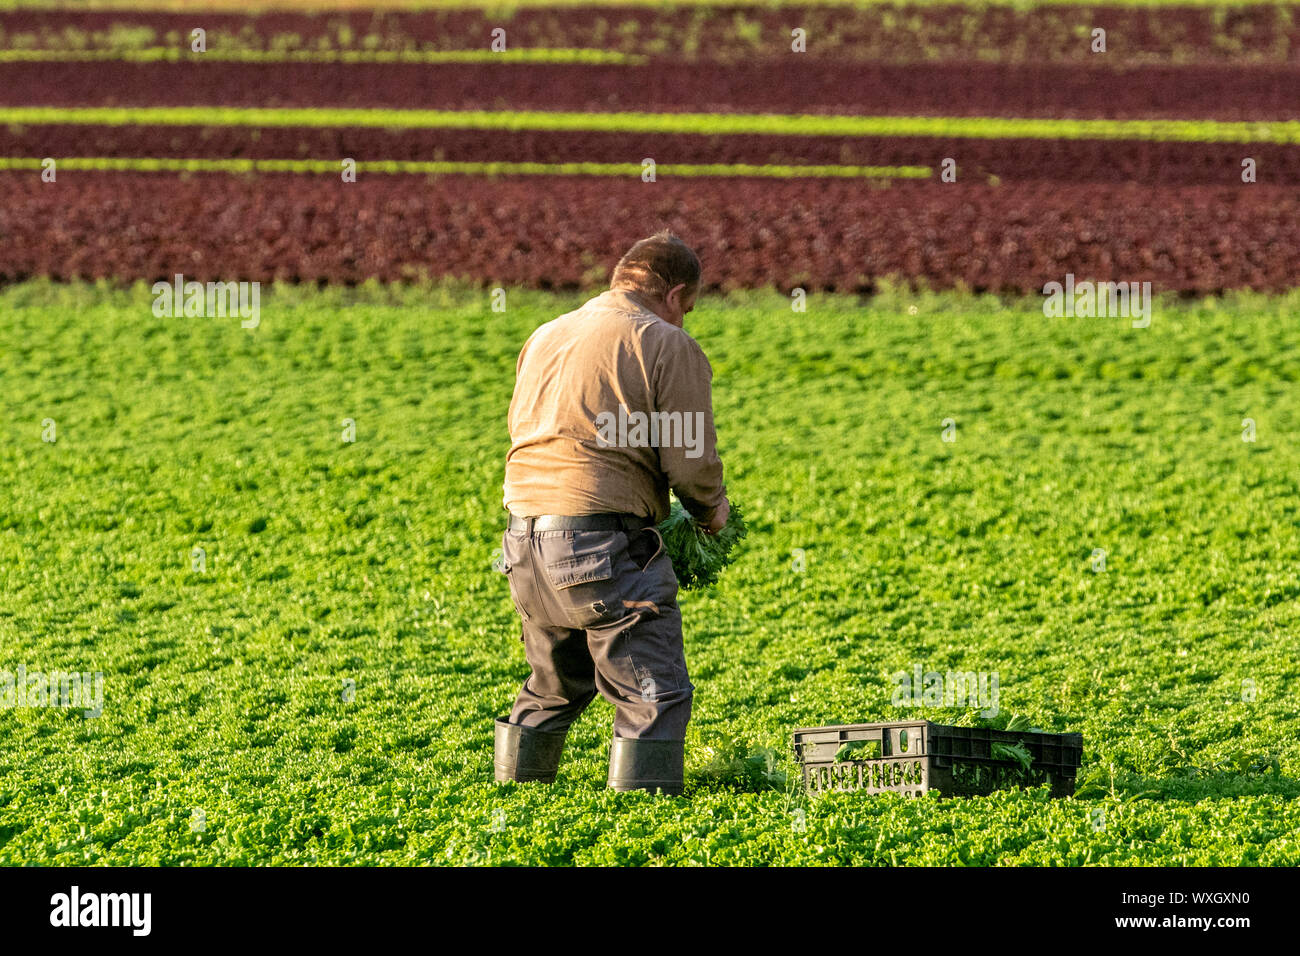 Burscough, Lancashire, UK. 17th Sep, 2019. EU Nationals harvesting lettuce face an uncertain future. The farms & farmers consistently rely on a large number of immigrant and migrant works to assist in the labour intensive planting, weeding and harvesting of salad crops, and whose employment remains in some doubt as negotiations start over Brexit. Britain's food production depends on seasonal migrant labour from the EU. Credit; Credit: MediaWorldImages/Alamy Live News Stock Photo